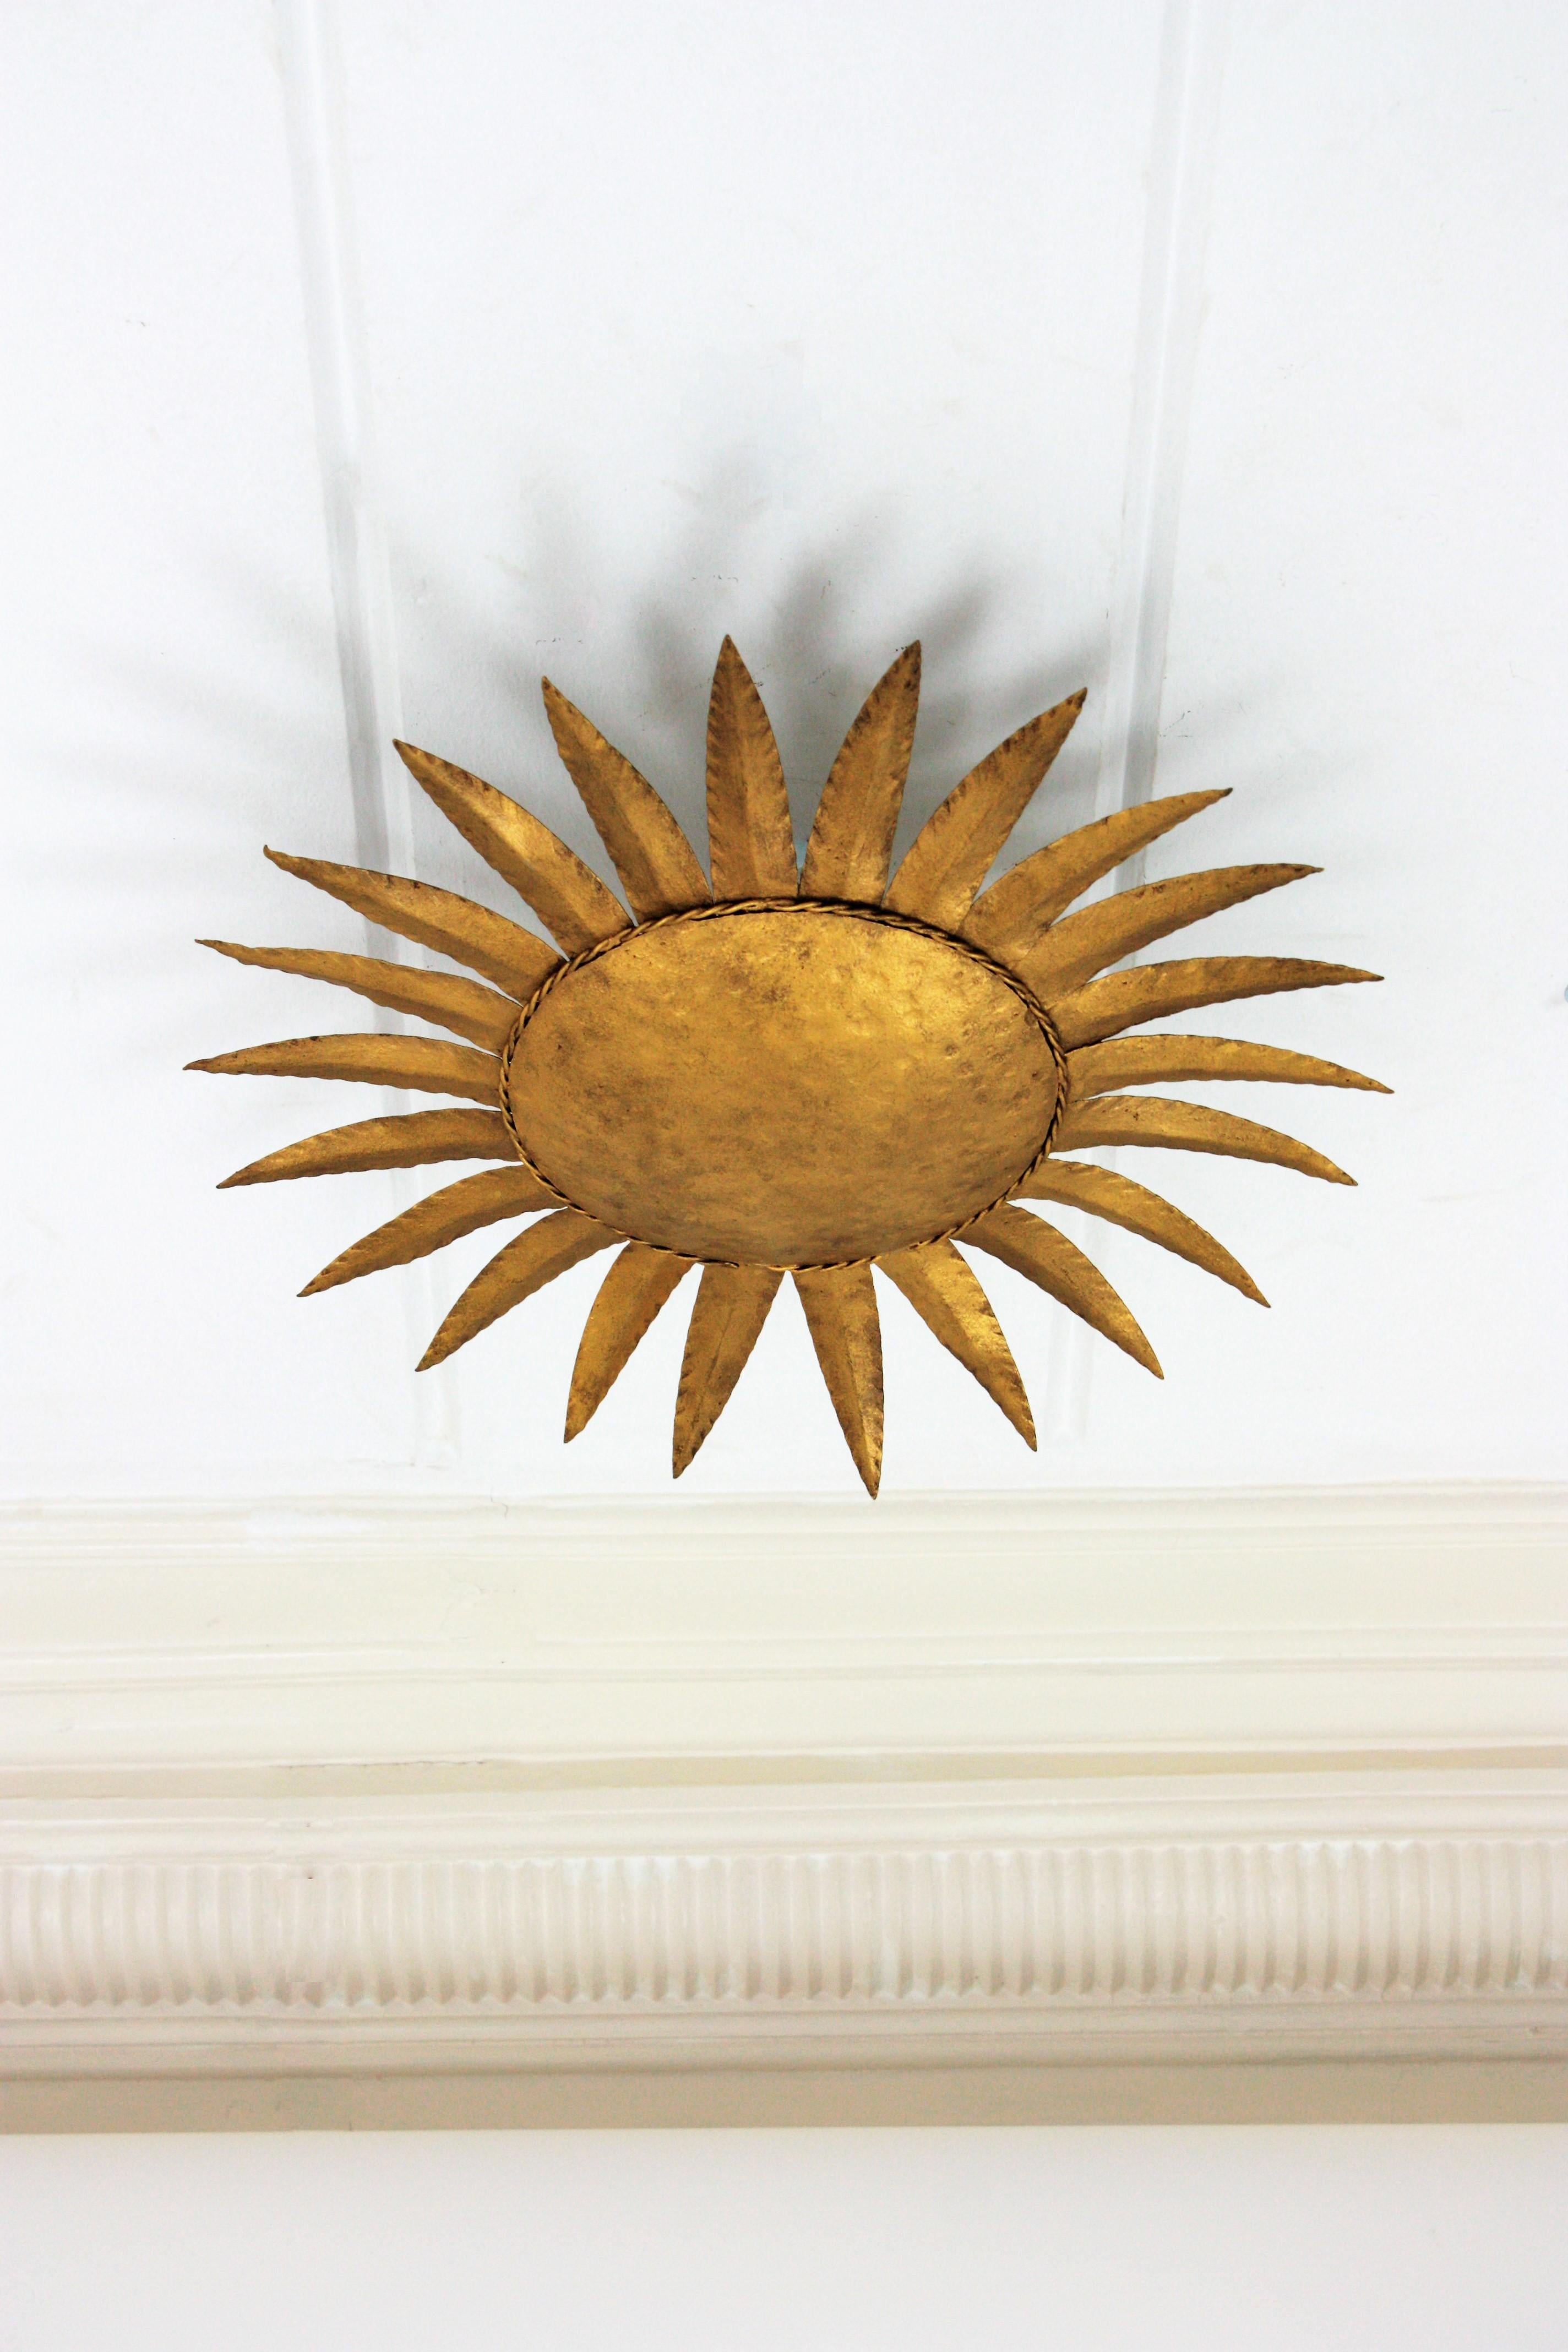 Eye-catching gilt wrought iron sunburst ceiling flush mount in the style of Brutalism. Manufactured by Ferro Art, Spain, 1960s.
This hand-hammered iron gilded sunburst flush mount or wall sconce will be a nice midcentury Brutalist accent wherever